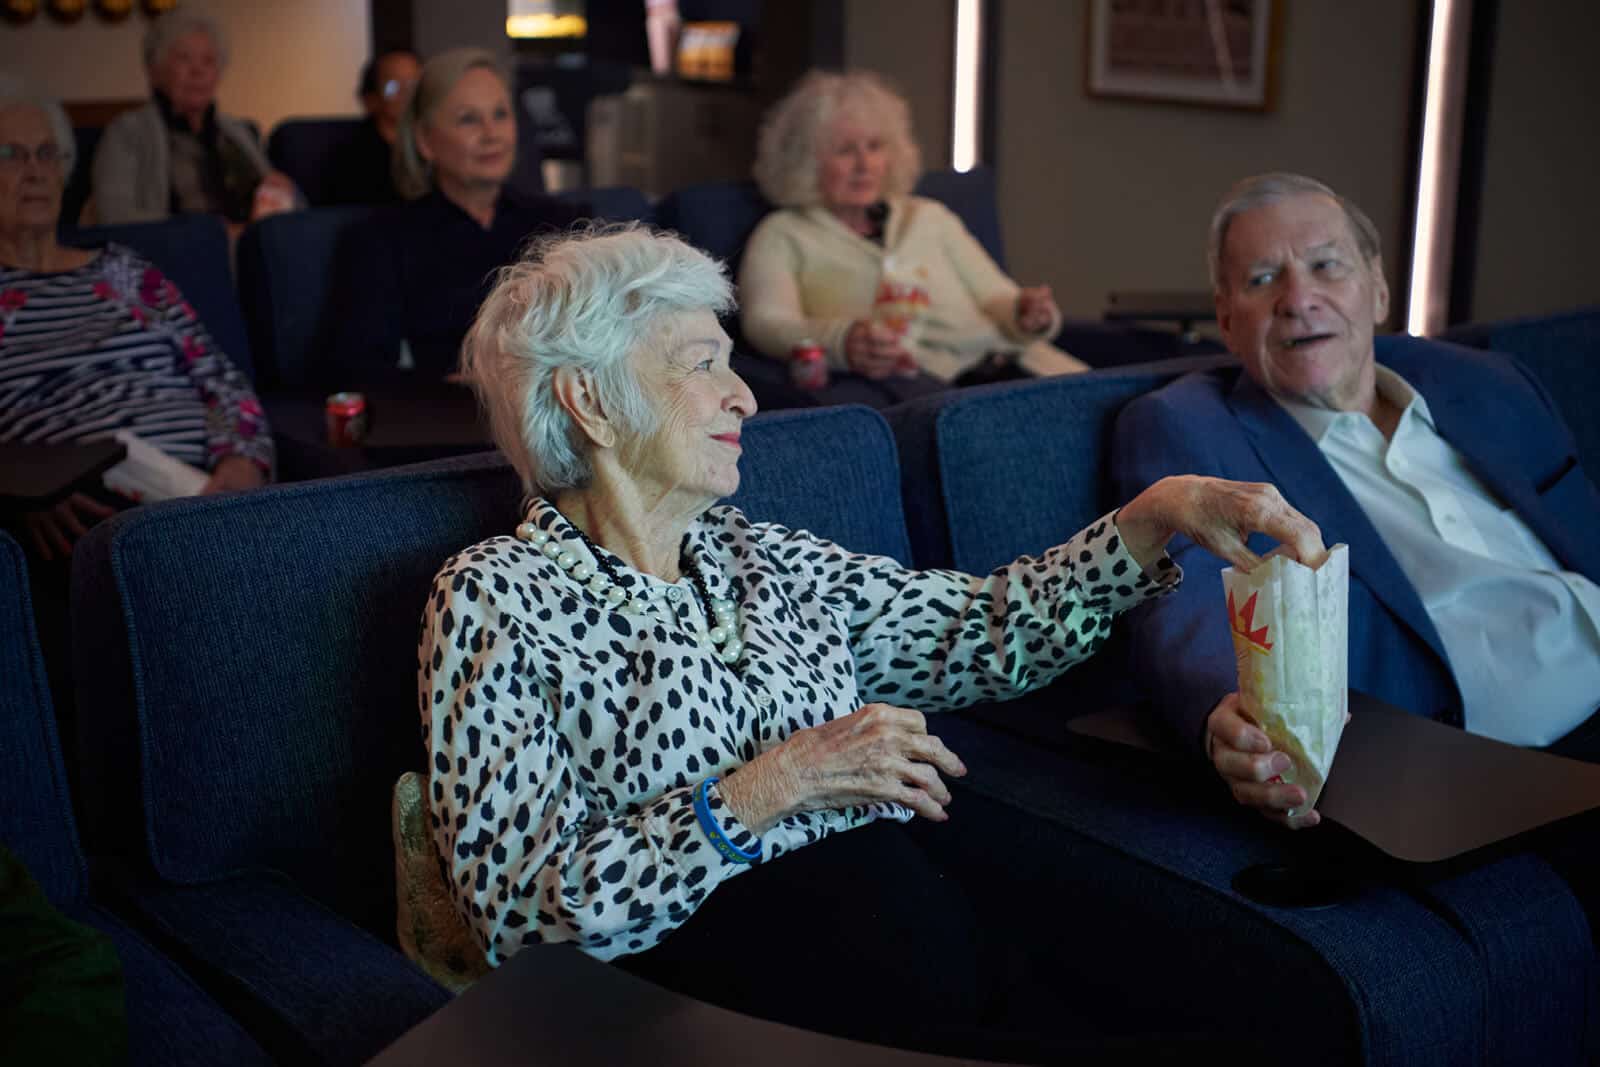 residents eating popcorn and watching a movie